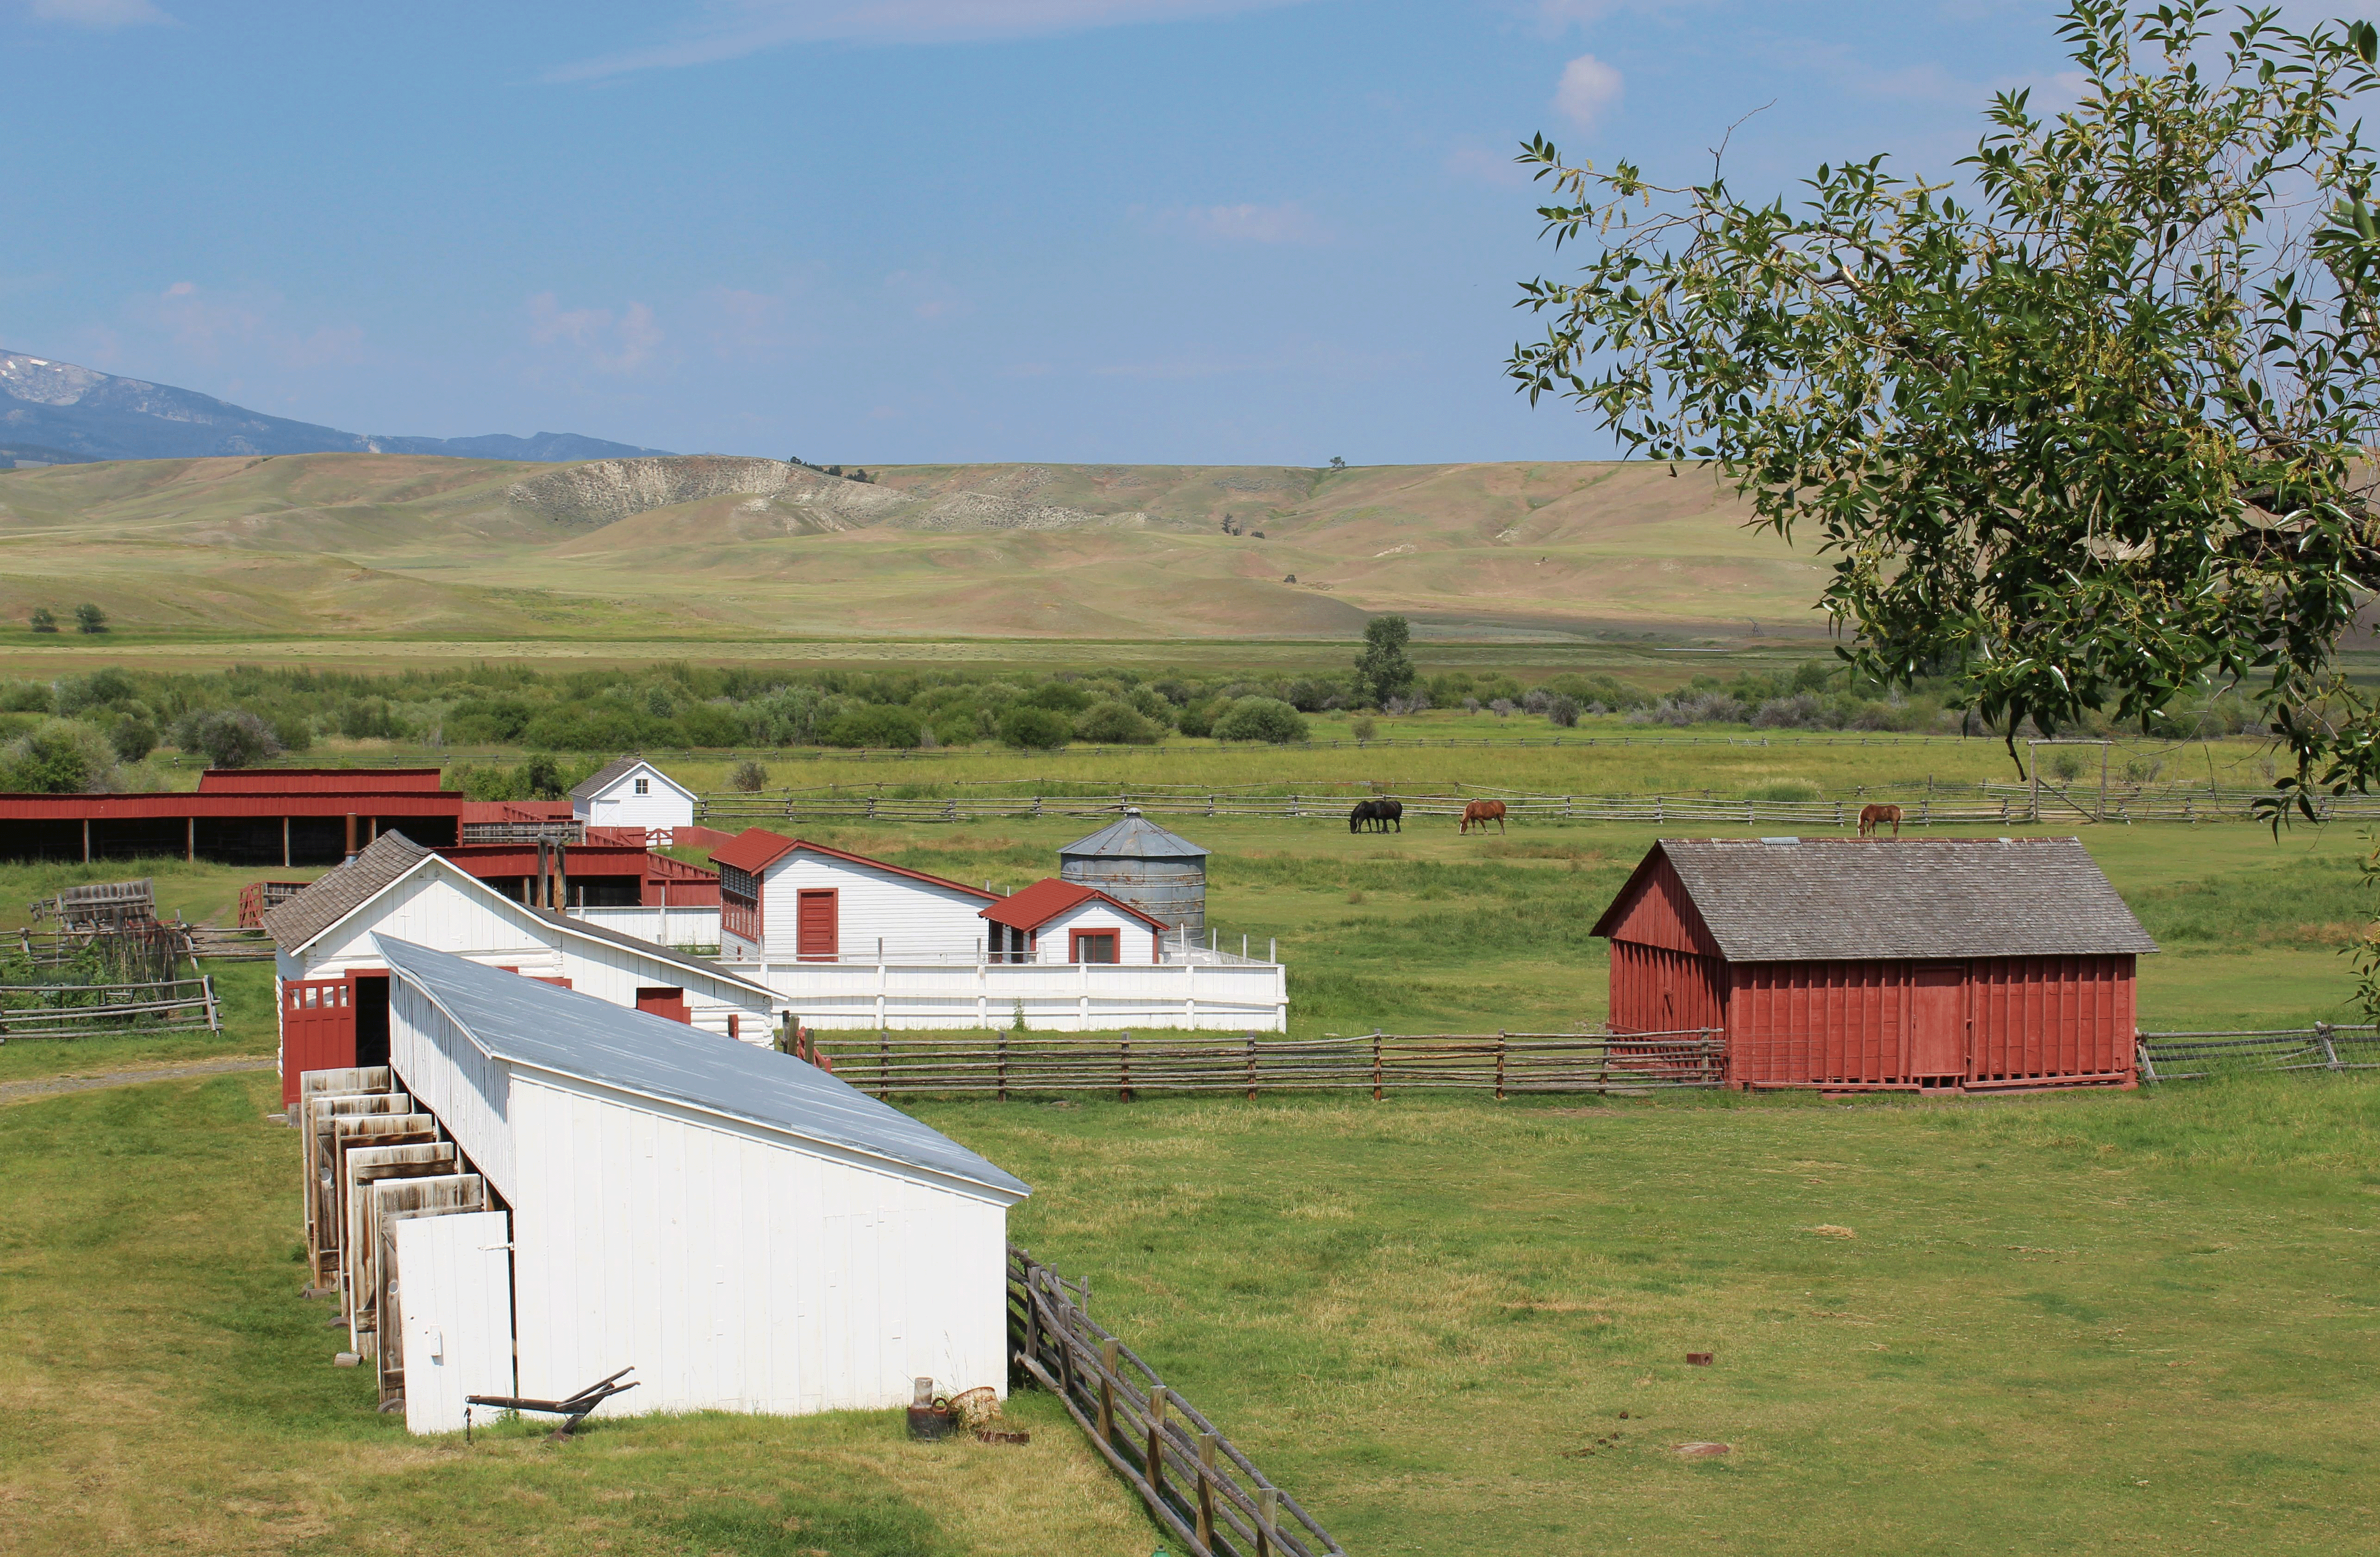 View of barns and outbuildings from the second floor of the ranch house.  Horses graze in the pasture.